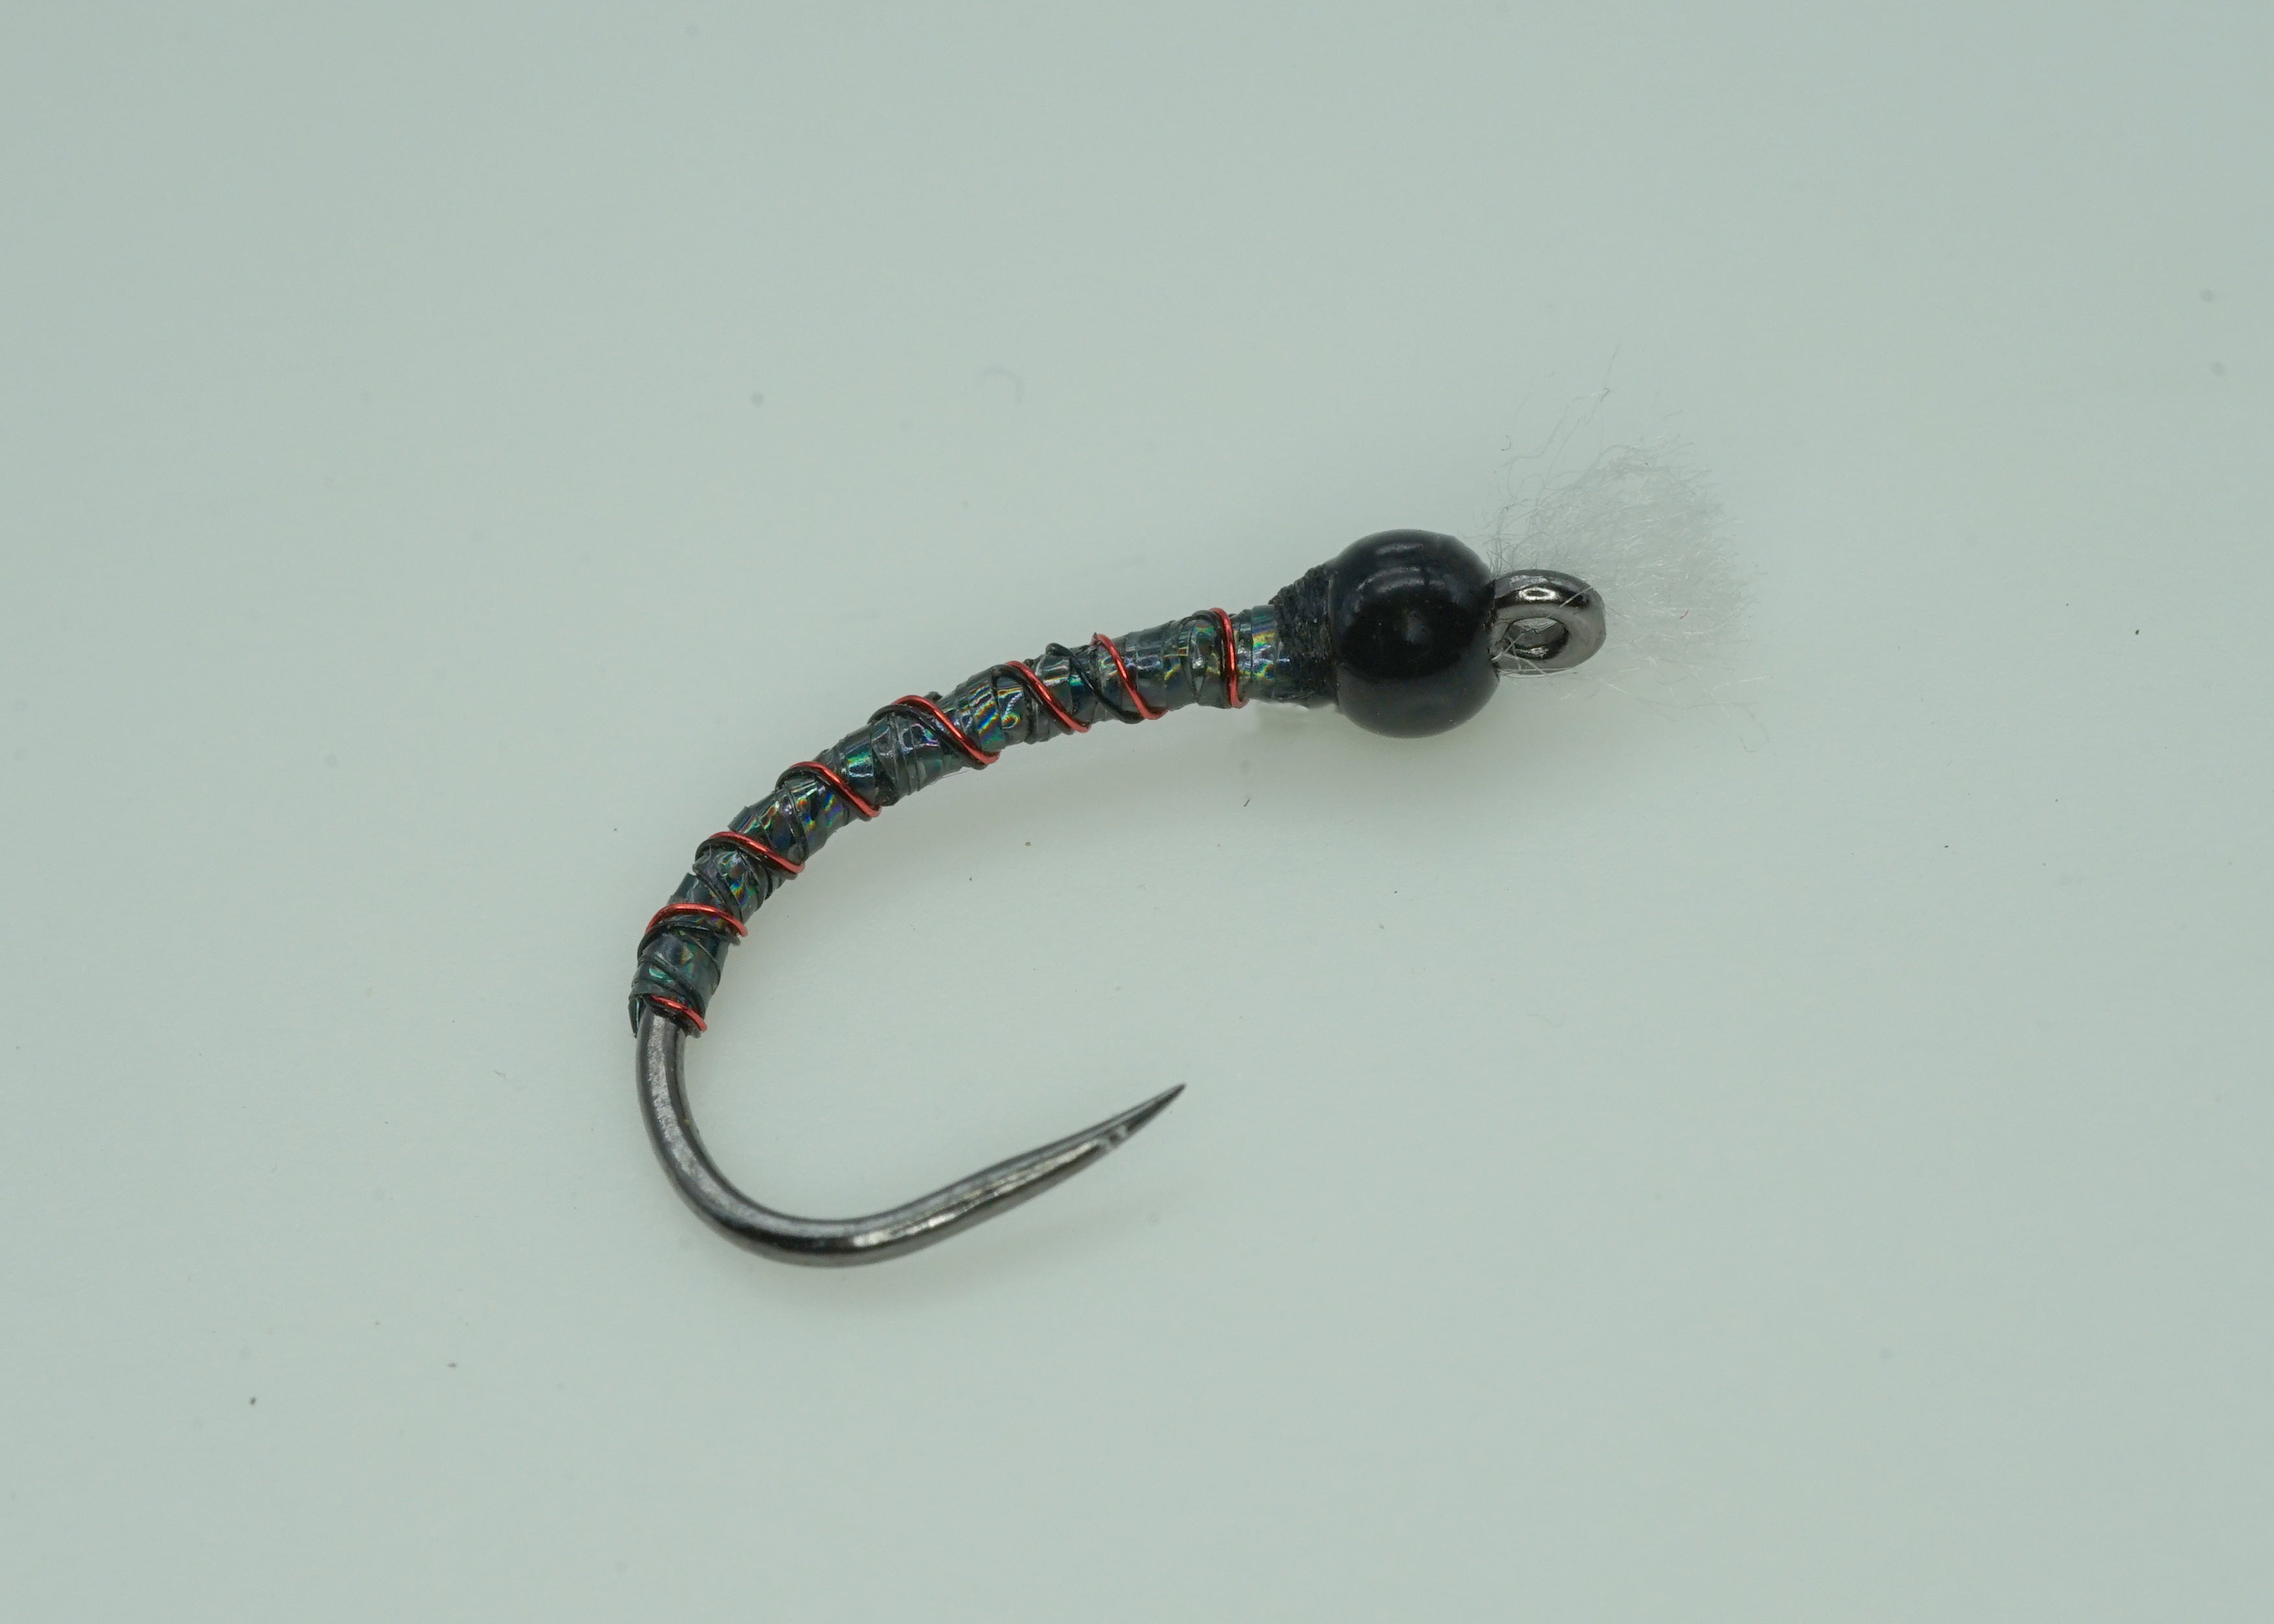 Brian Chan's Black Holographic Chironomid Pupa